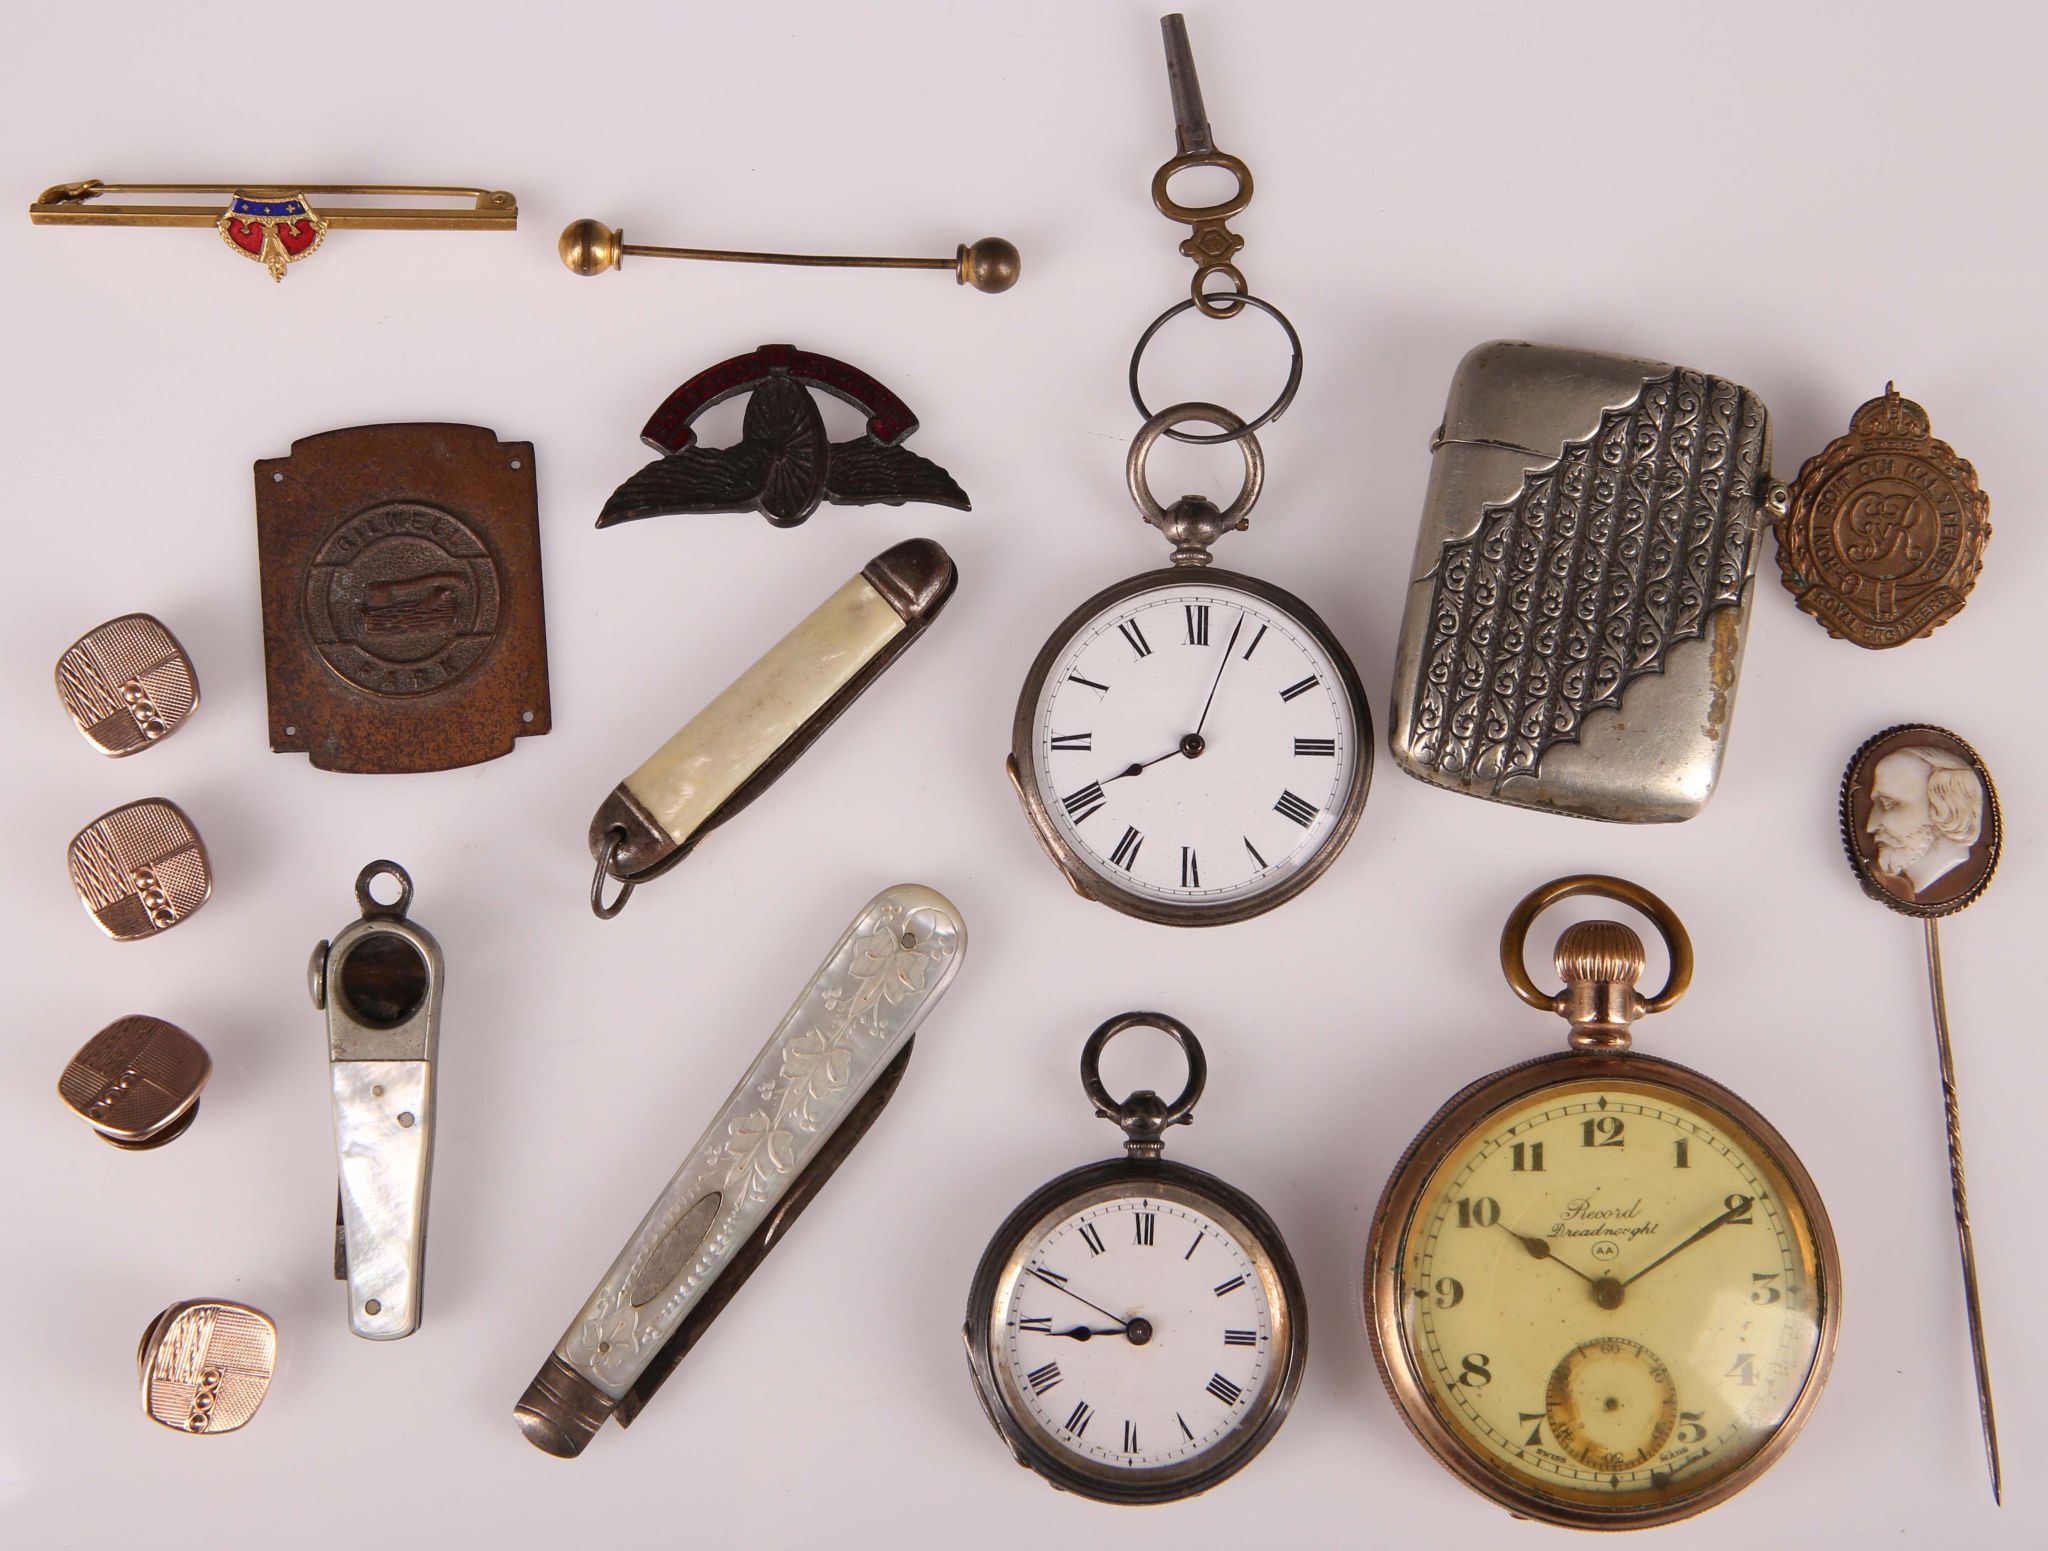 Two fob watches, sold together with a gold plated pocket watch, a vesta case, two pen knives, a